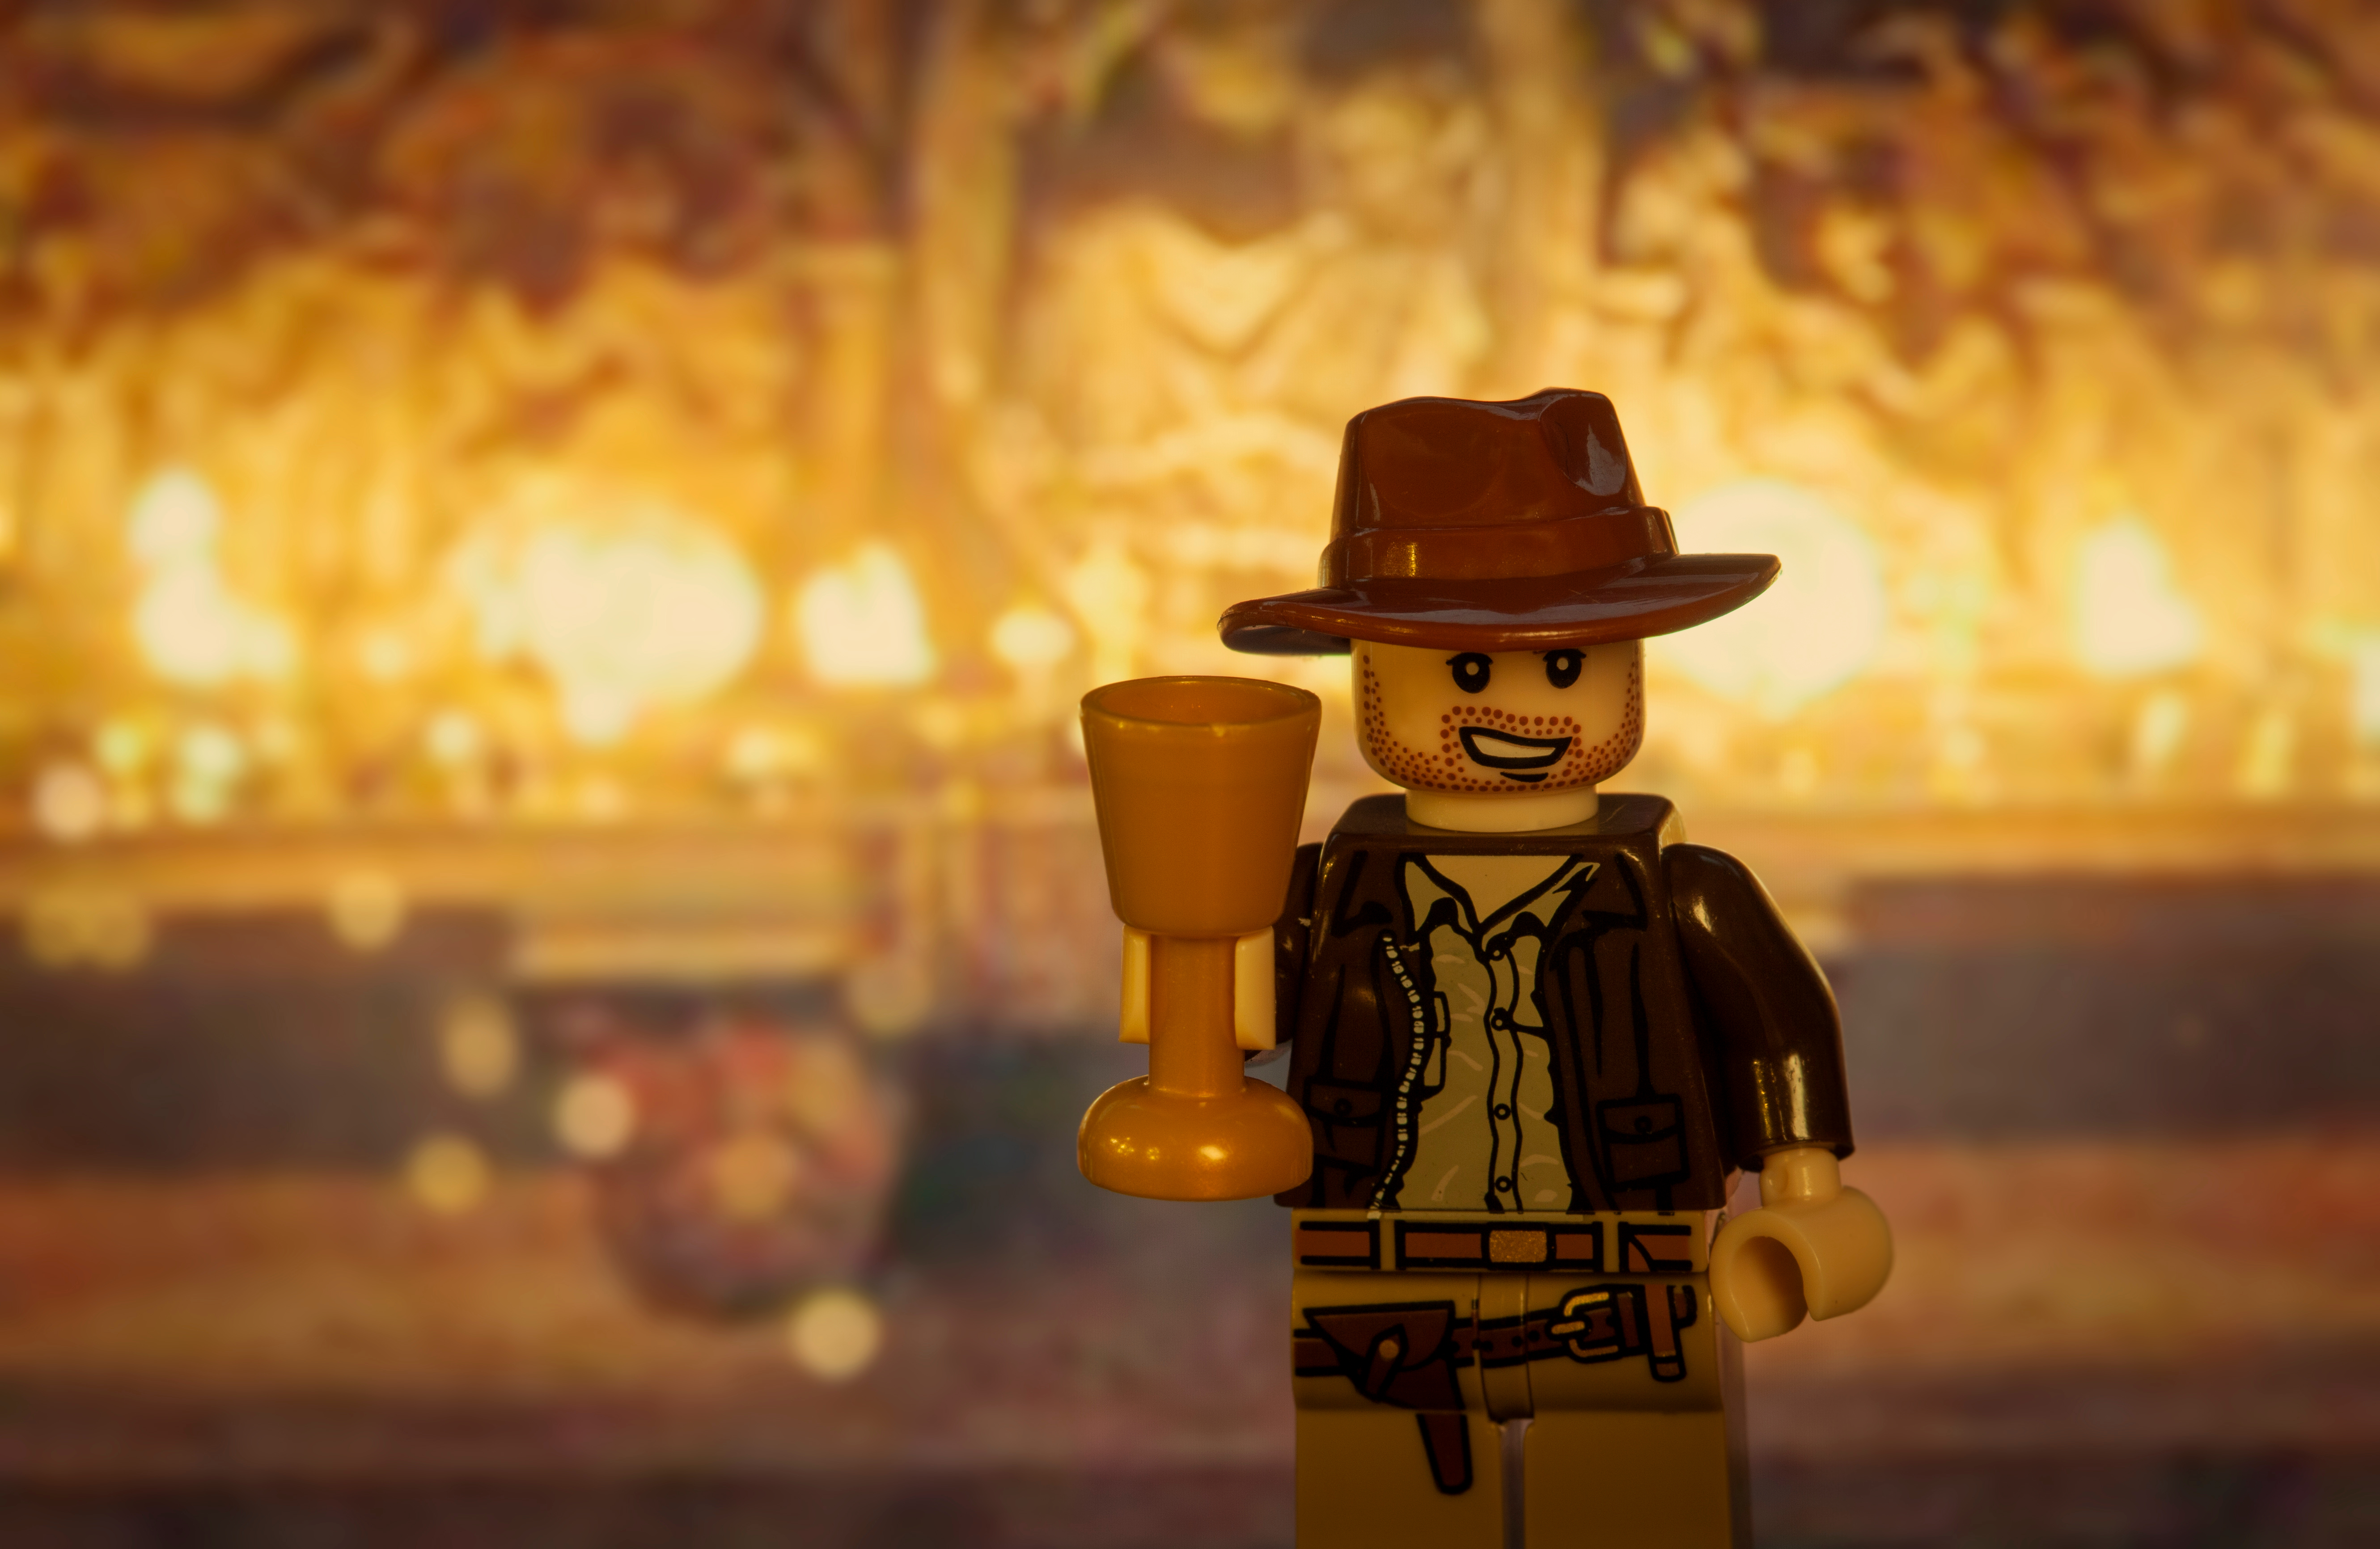 A Lego version of Indiana Jones is posed holding a cup representing the Holy Grail. 